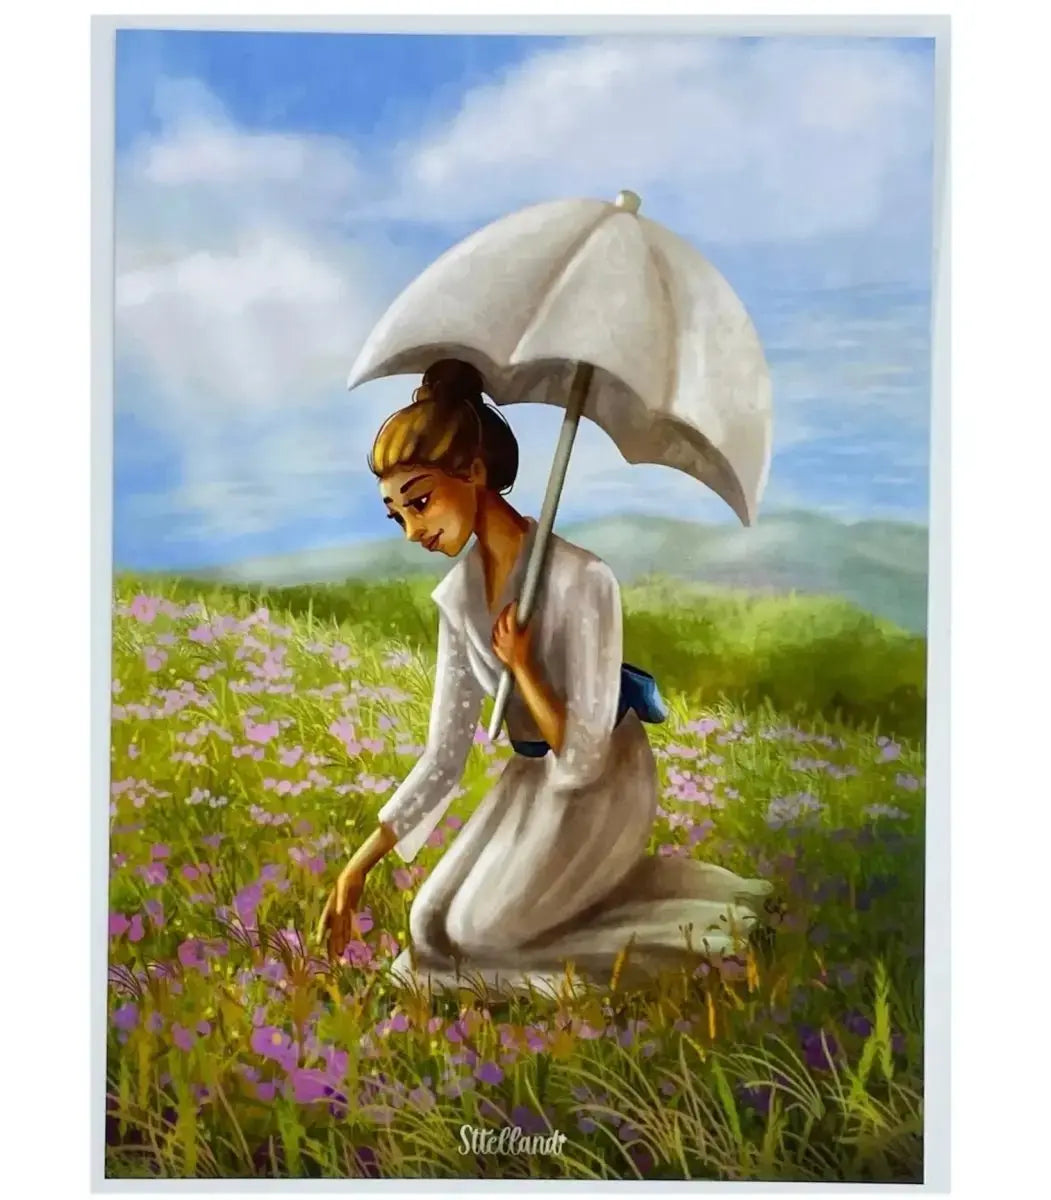 Peasant Woman in the hill - Wall Art Poster Print Sttelland Boutique